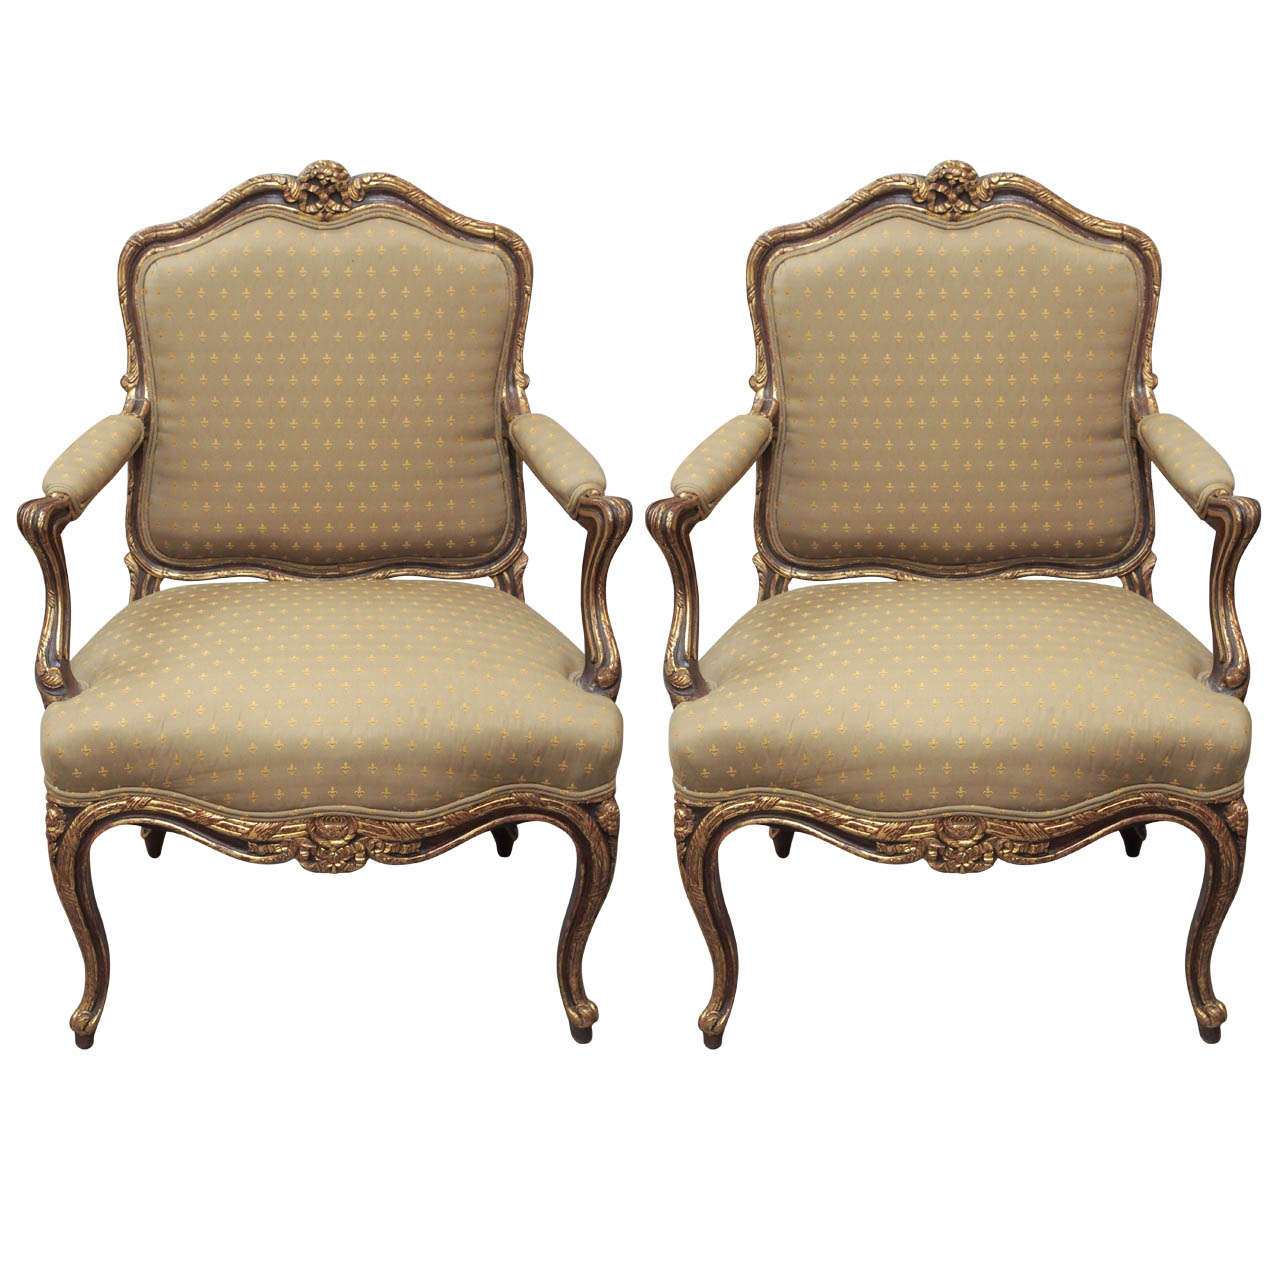 Pair of Giltwood French Fauteuils